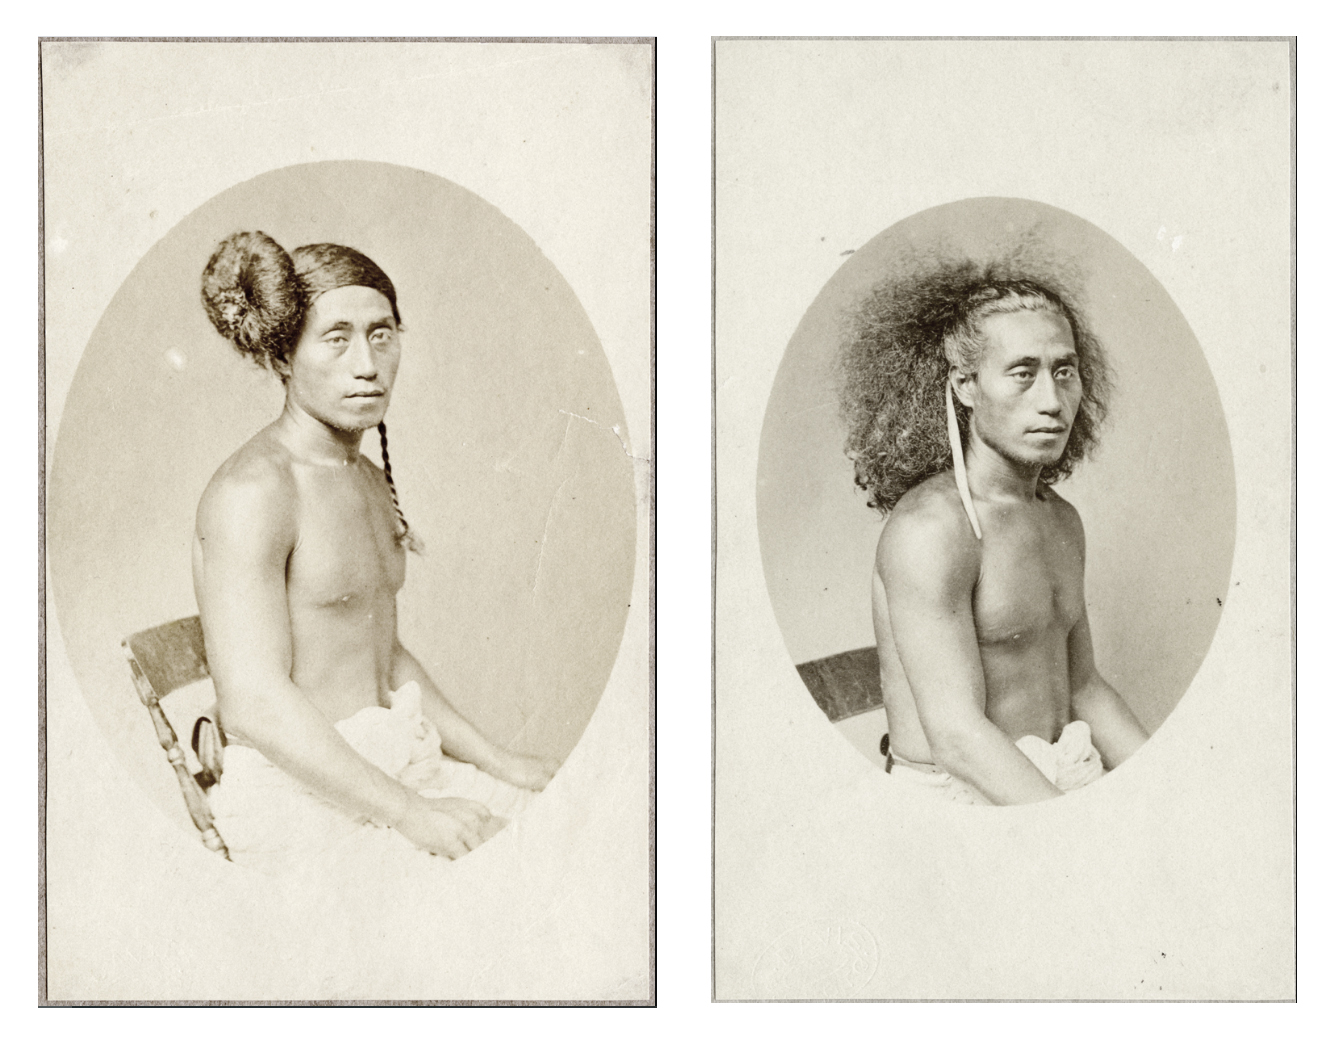 pair of black and white photographs showing a Samoan person posed with hair up and down